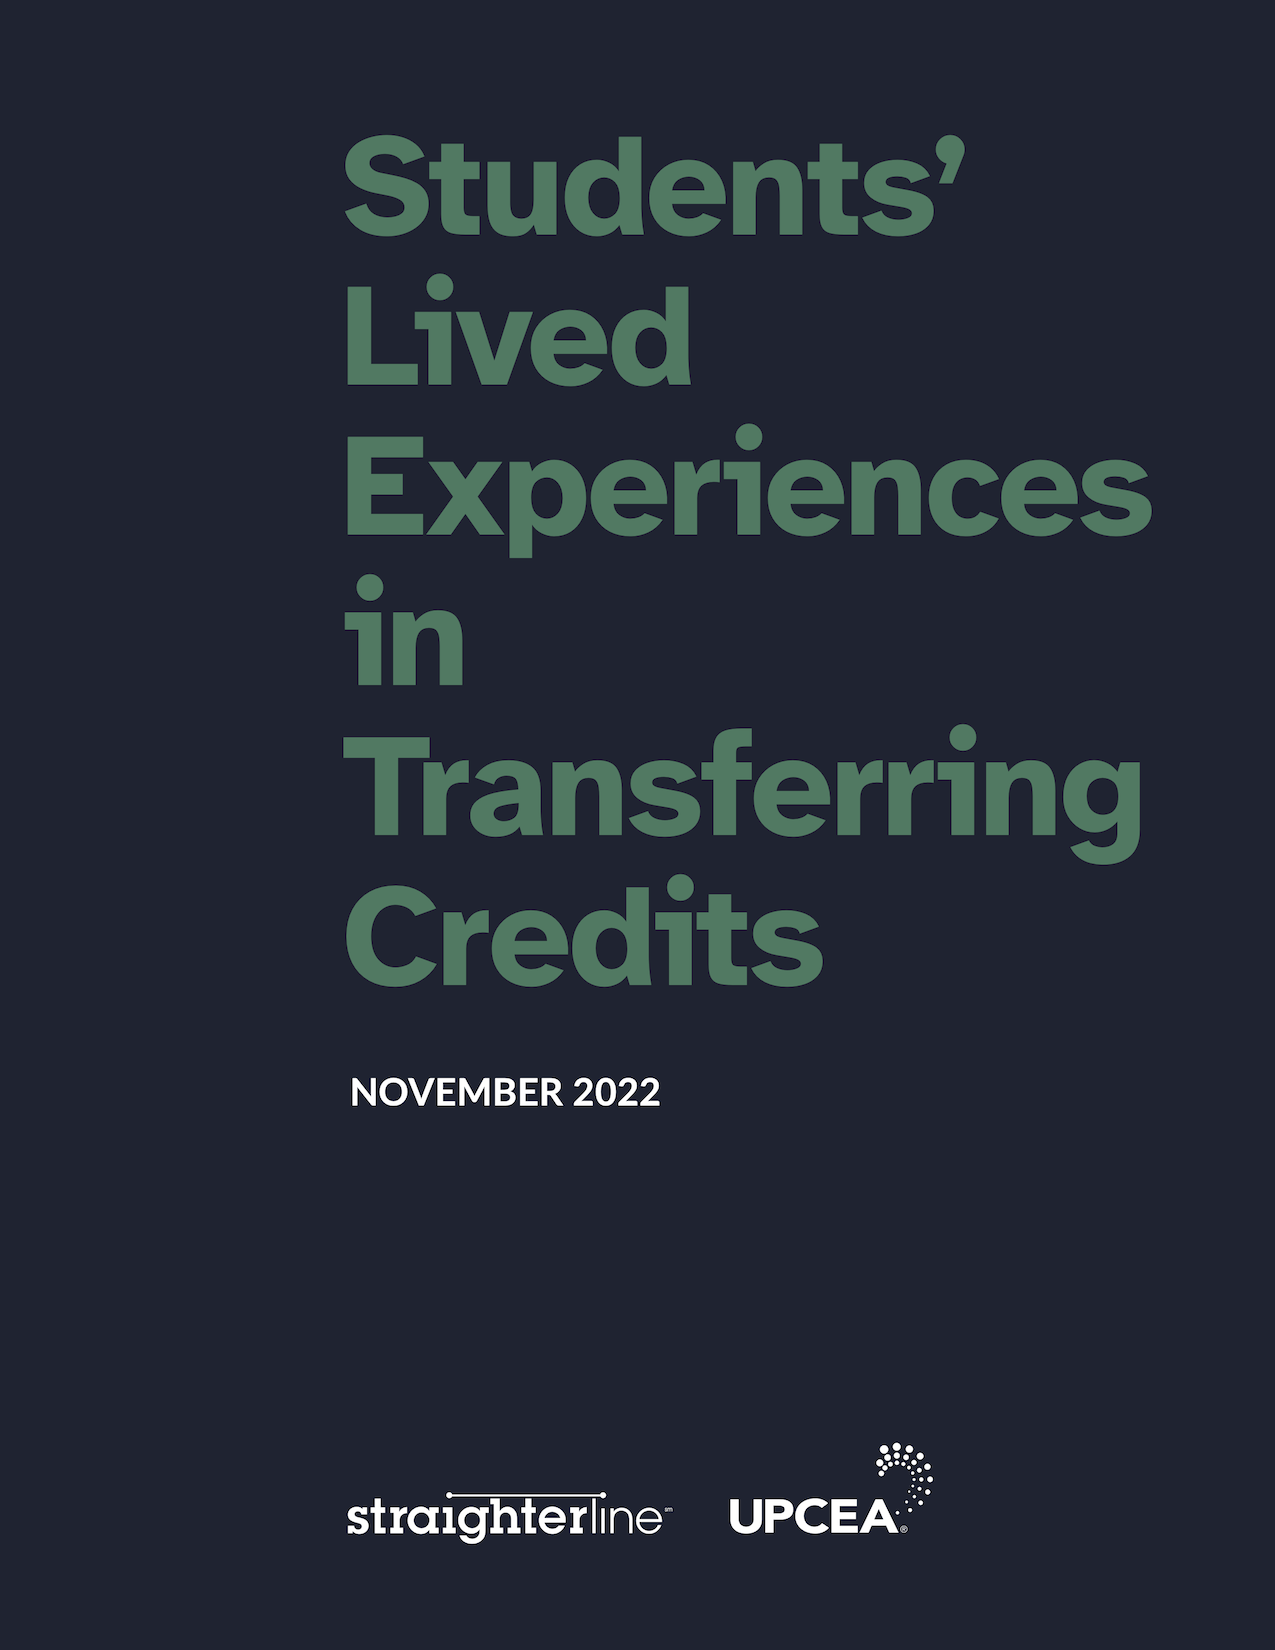 UPCEA_Straighterline_Students_Lived_Experiences_White_Paper_November_2022_COVER